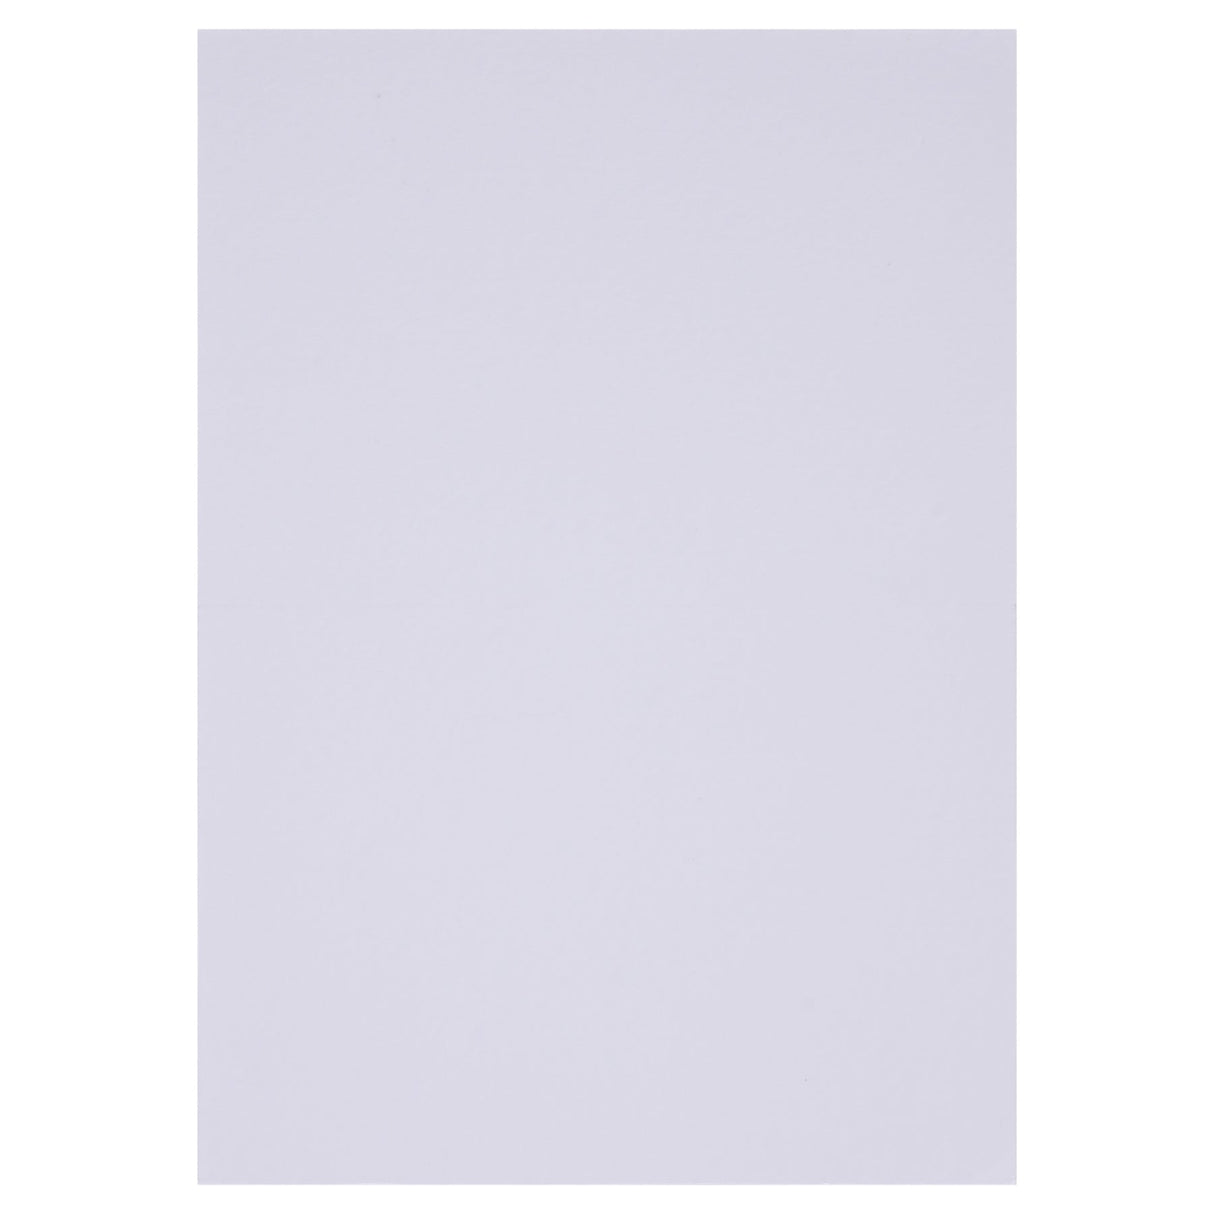 Premier Activity A4 Card - 160 gsm - White - 250 Sheets-Craft Paper & Card-Premier | Buy Online at Stationery Shop